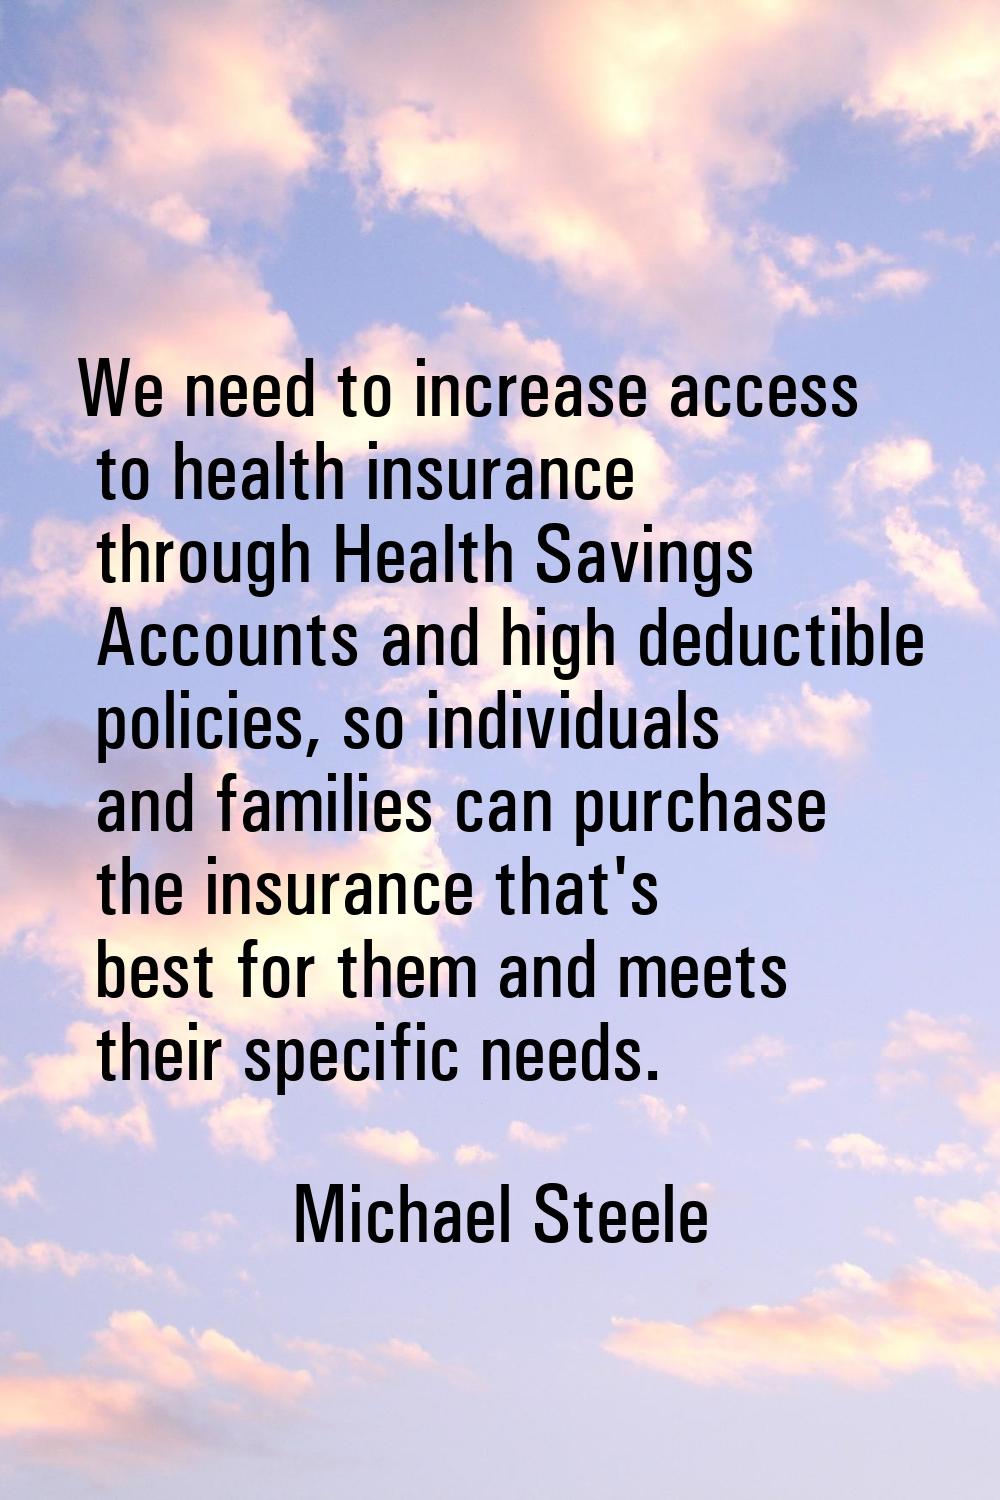 We need to increase access to health insurance through Health Savings Accounts and high deductible 